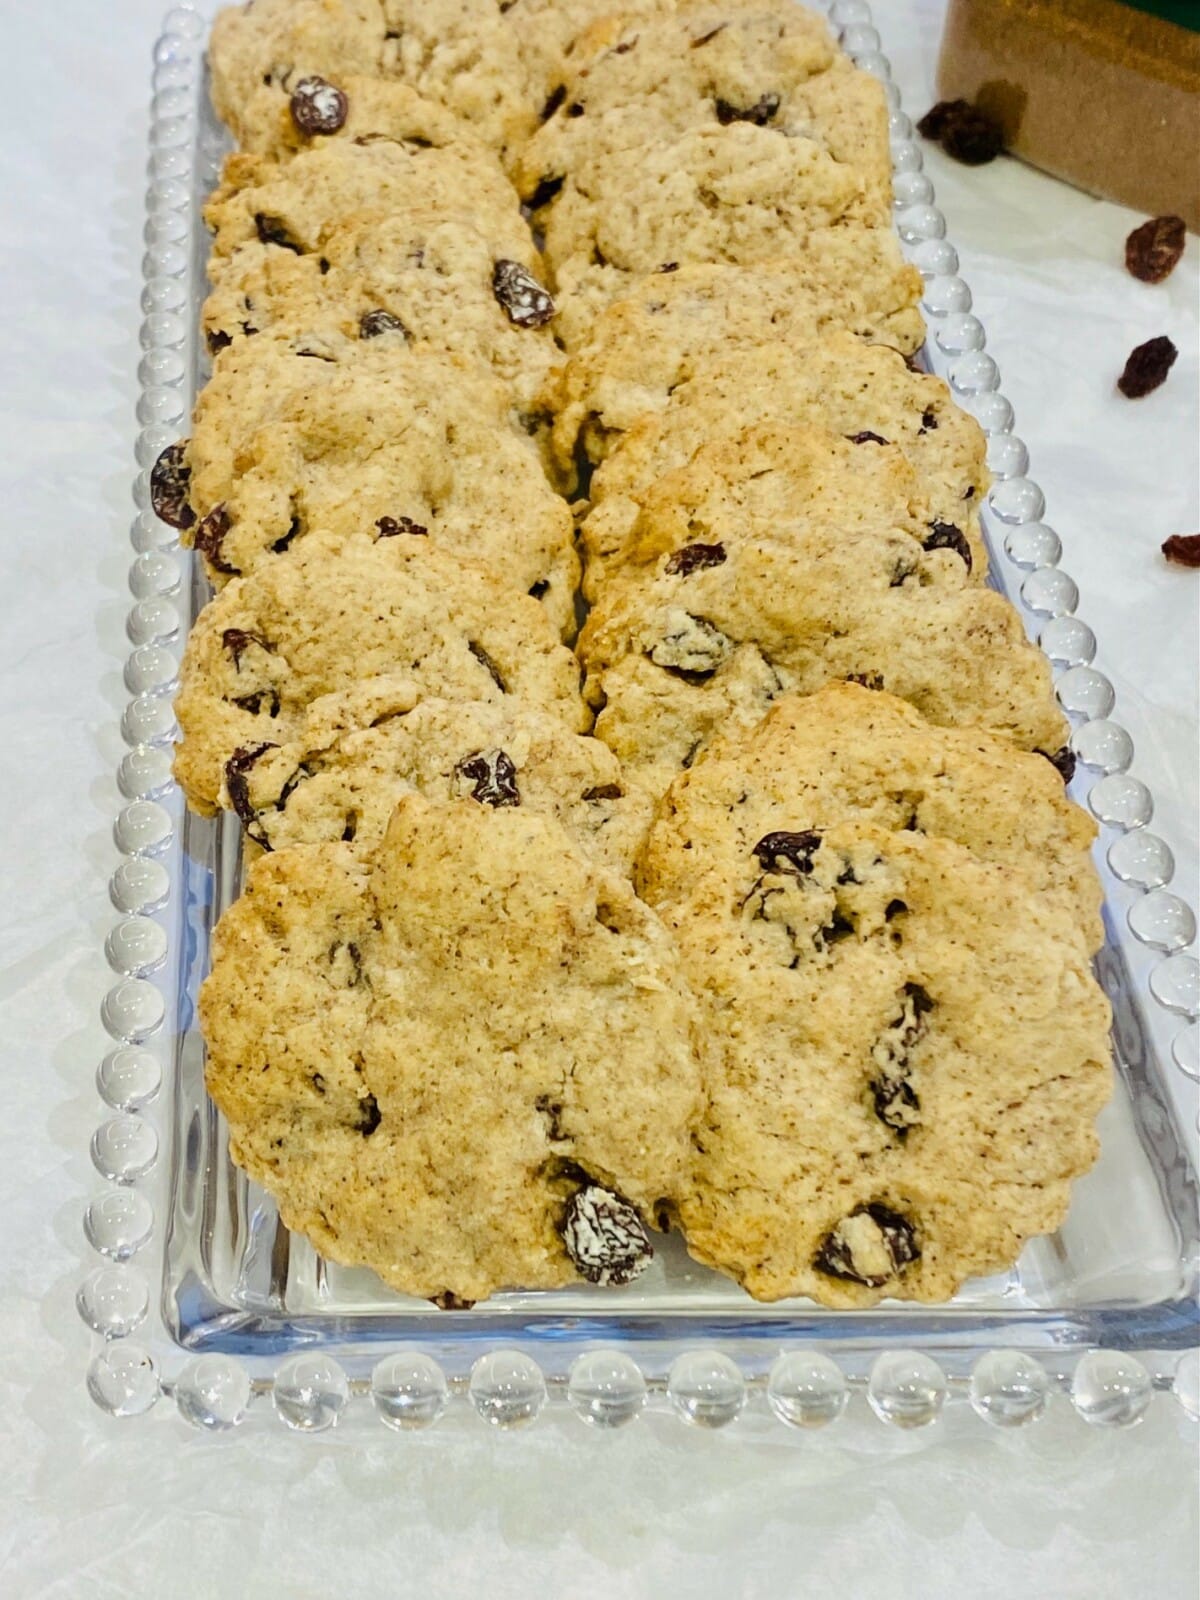 raisin biscuits - on a glass plate